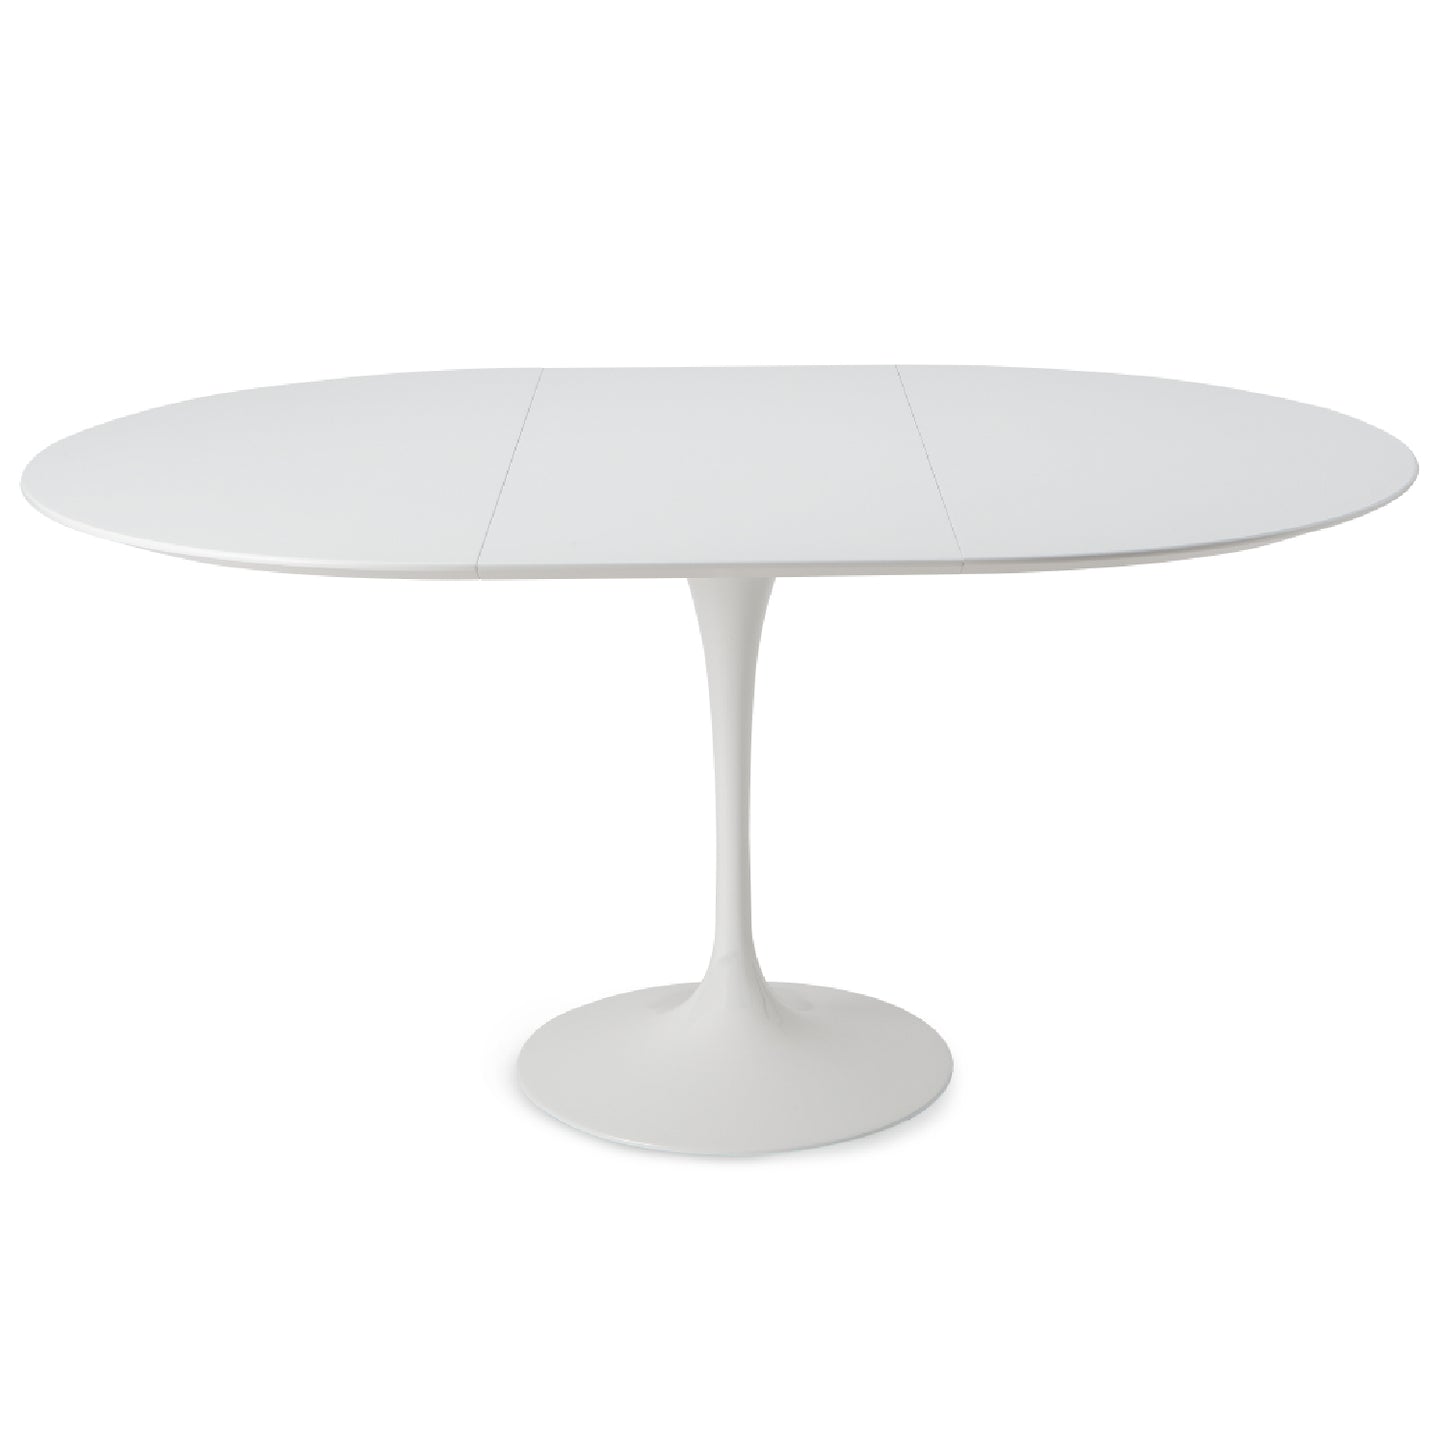 Art. 2001/2007/2002 Round or Oval Extendable Dining Table